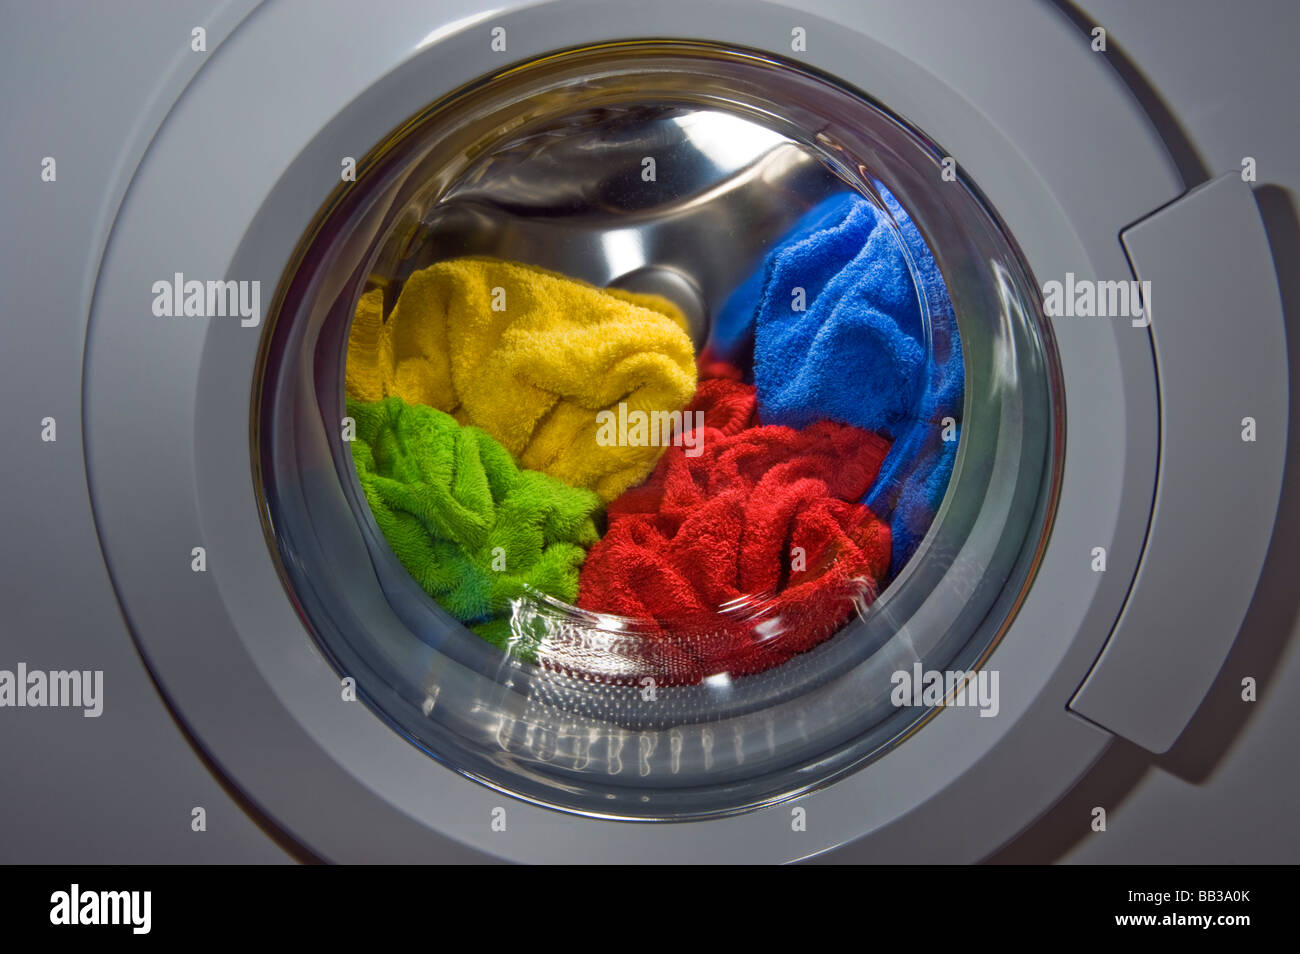 laundry washing machine wash cycle clean cleaner wear clothes casual terry cloth towelling inside color colour red yellow green Stock Photo